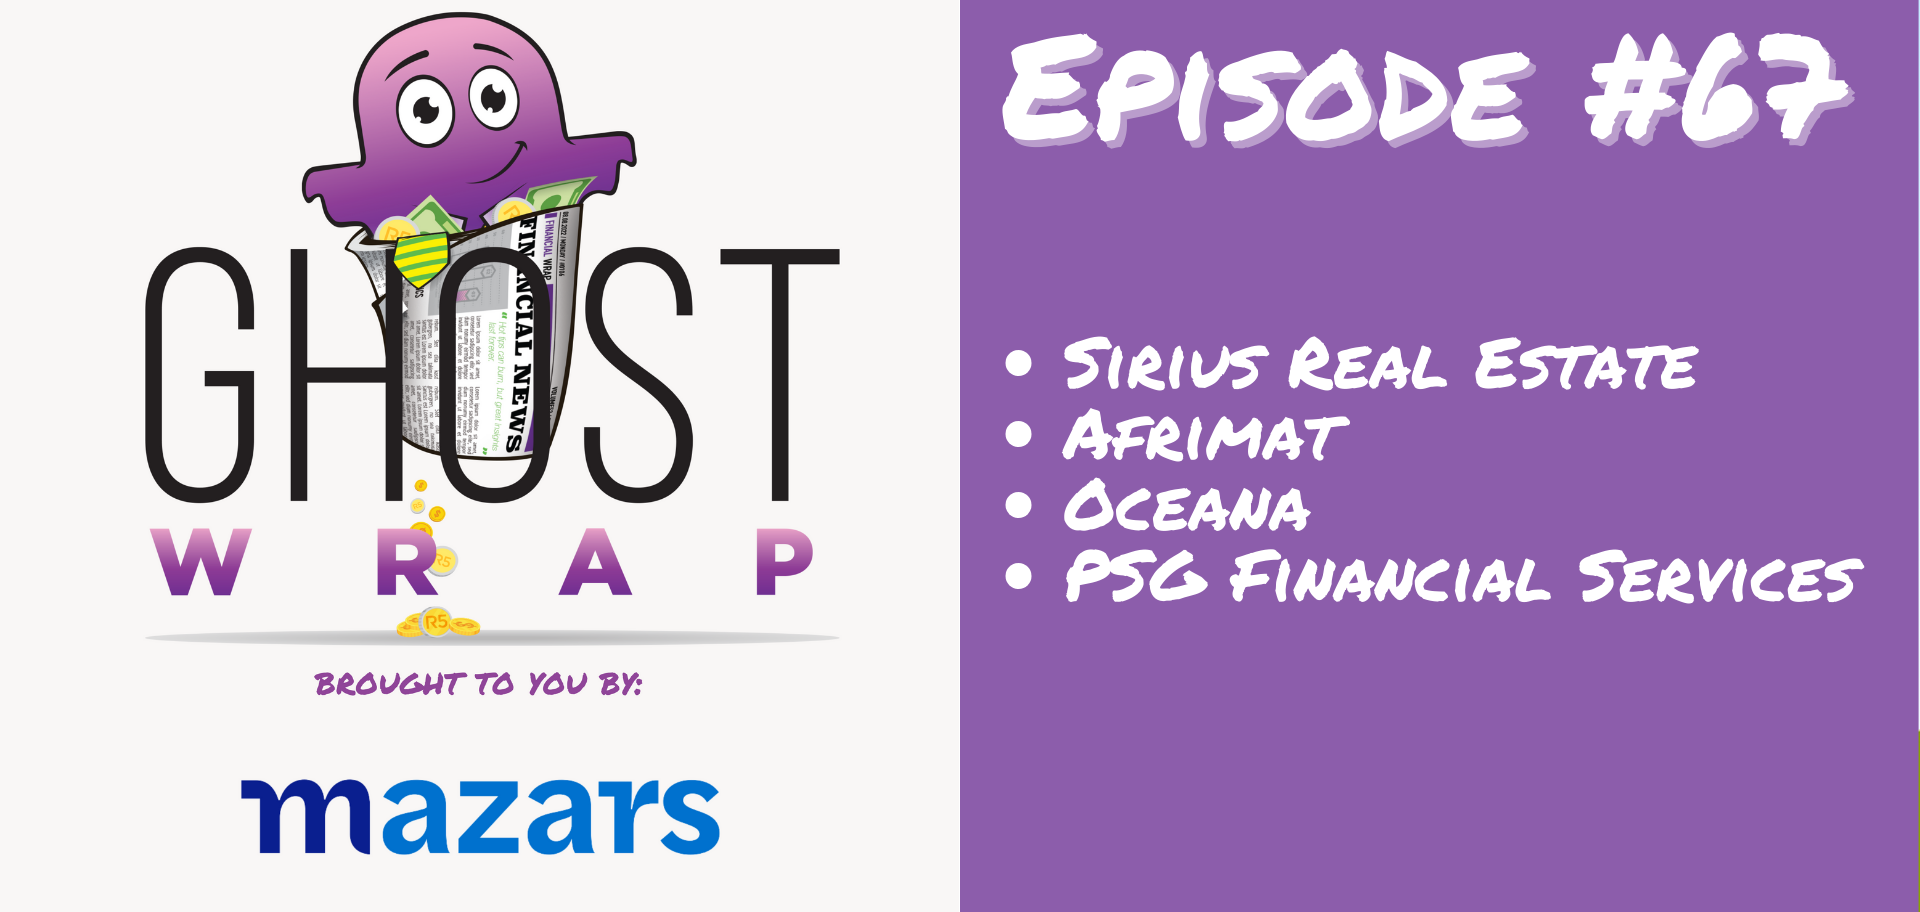 Ghost Wrap #67 (Sirius Real Estate | Afrimat | Oceana | PSG Financial Services)